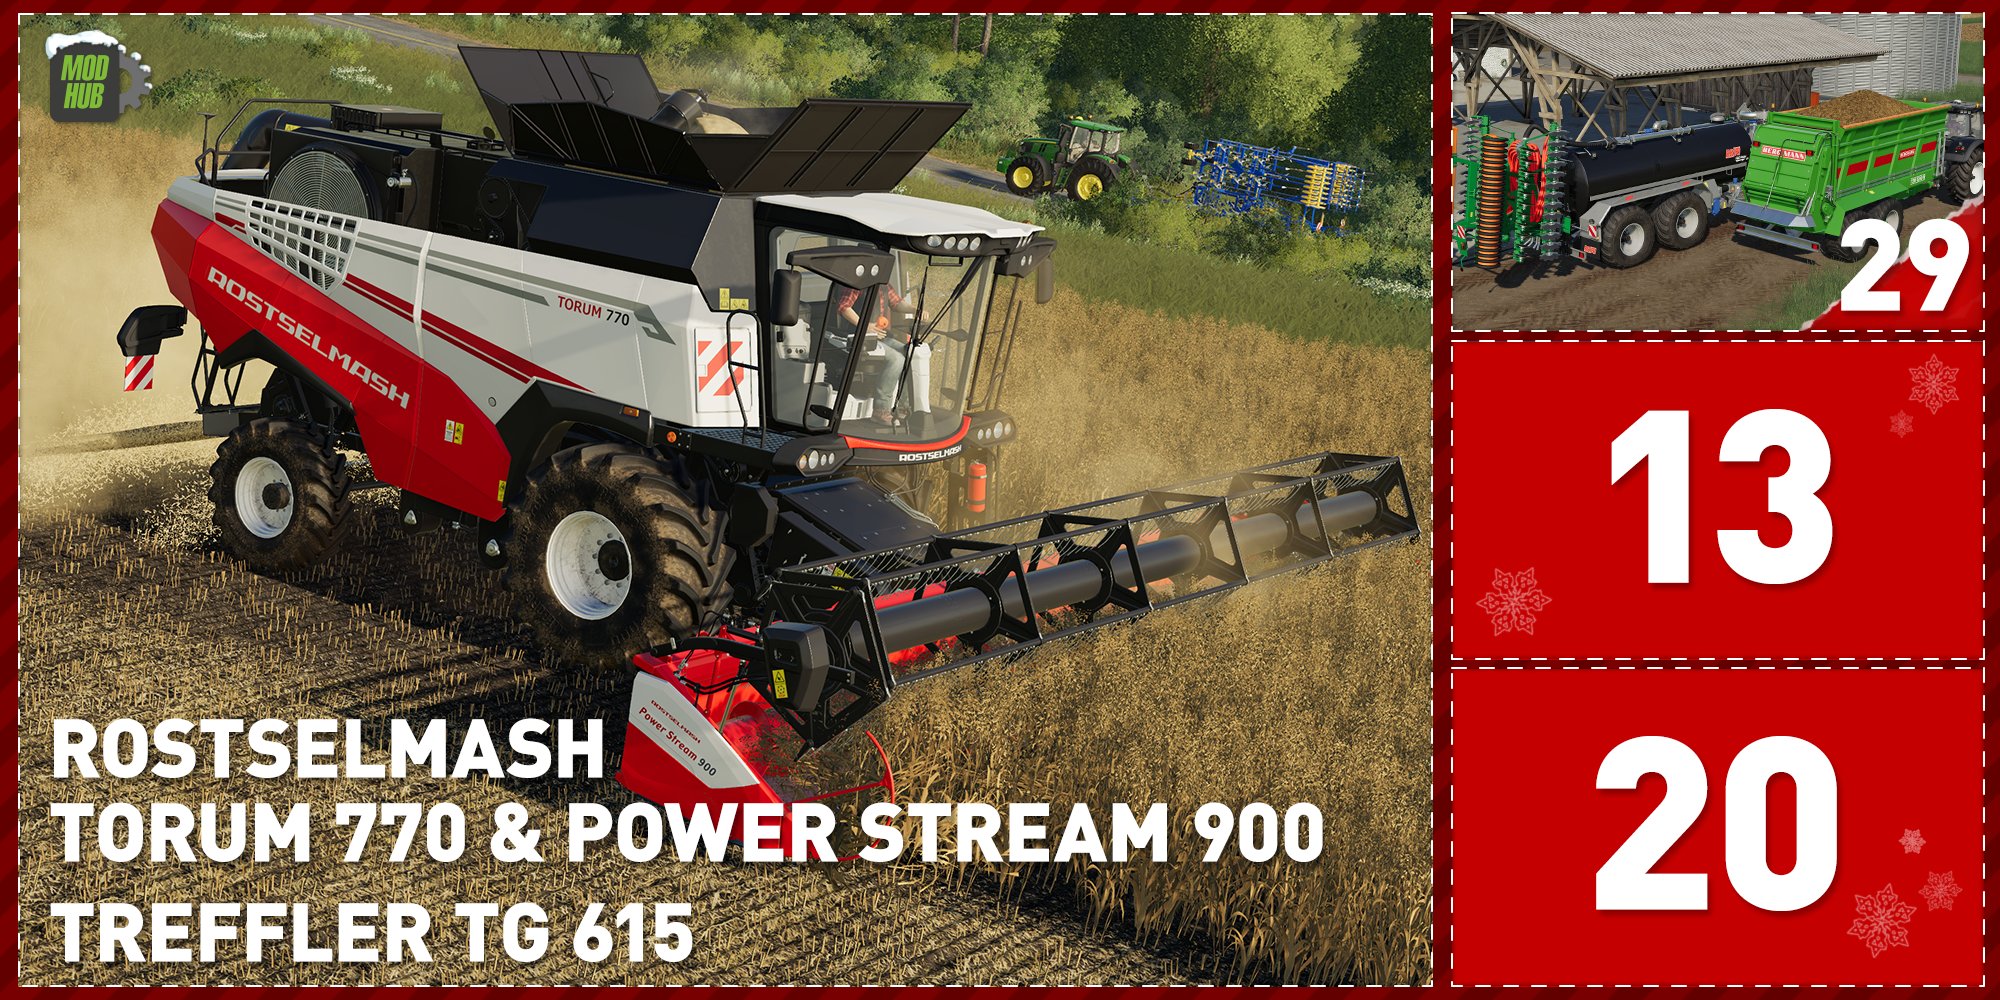 Havn mosaik Forsendelse Farming Simulator on Twitter: "I hope you were nice today, because Father  Christmas brought a lot of new things today! Now in the InGame Modhub on  PC/Mac, PS4 and XB1: Rostselmash Torum